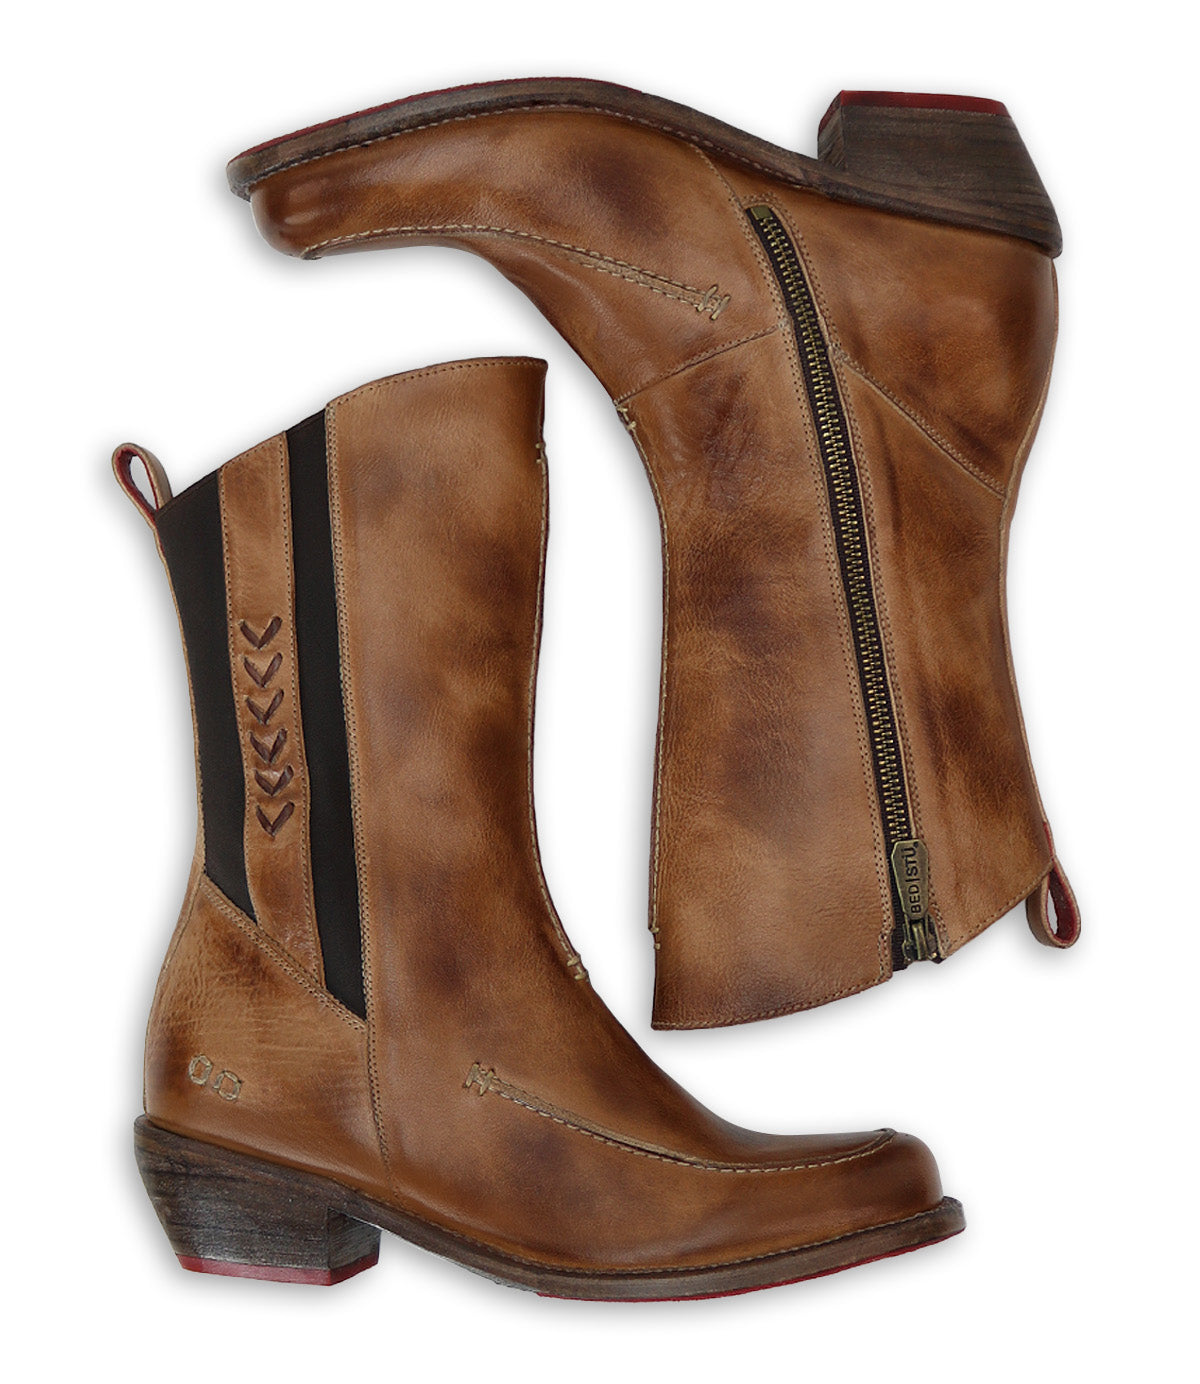 A pair of Nivi women's brown boots by Bed Stu.